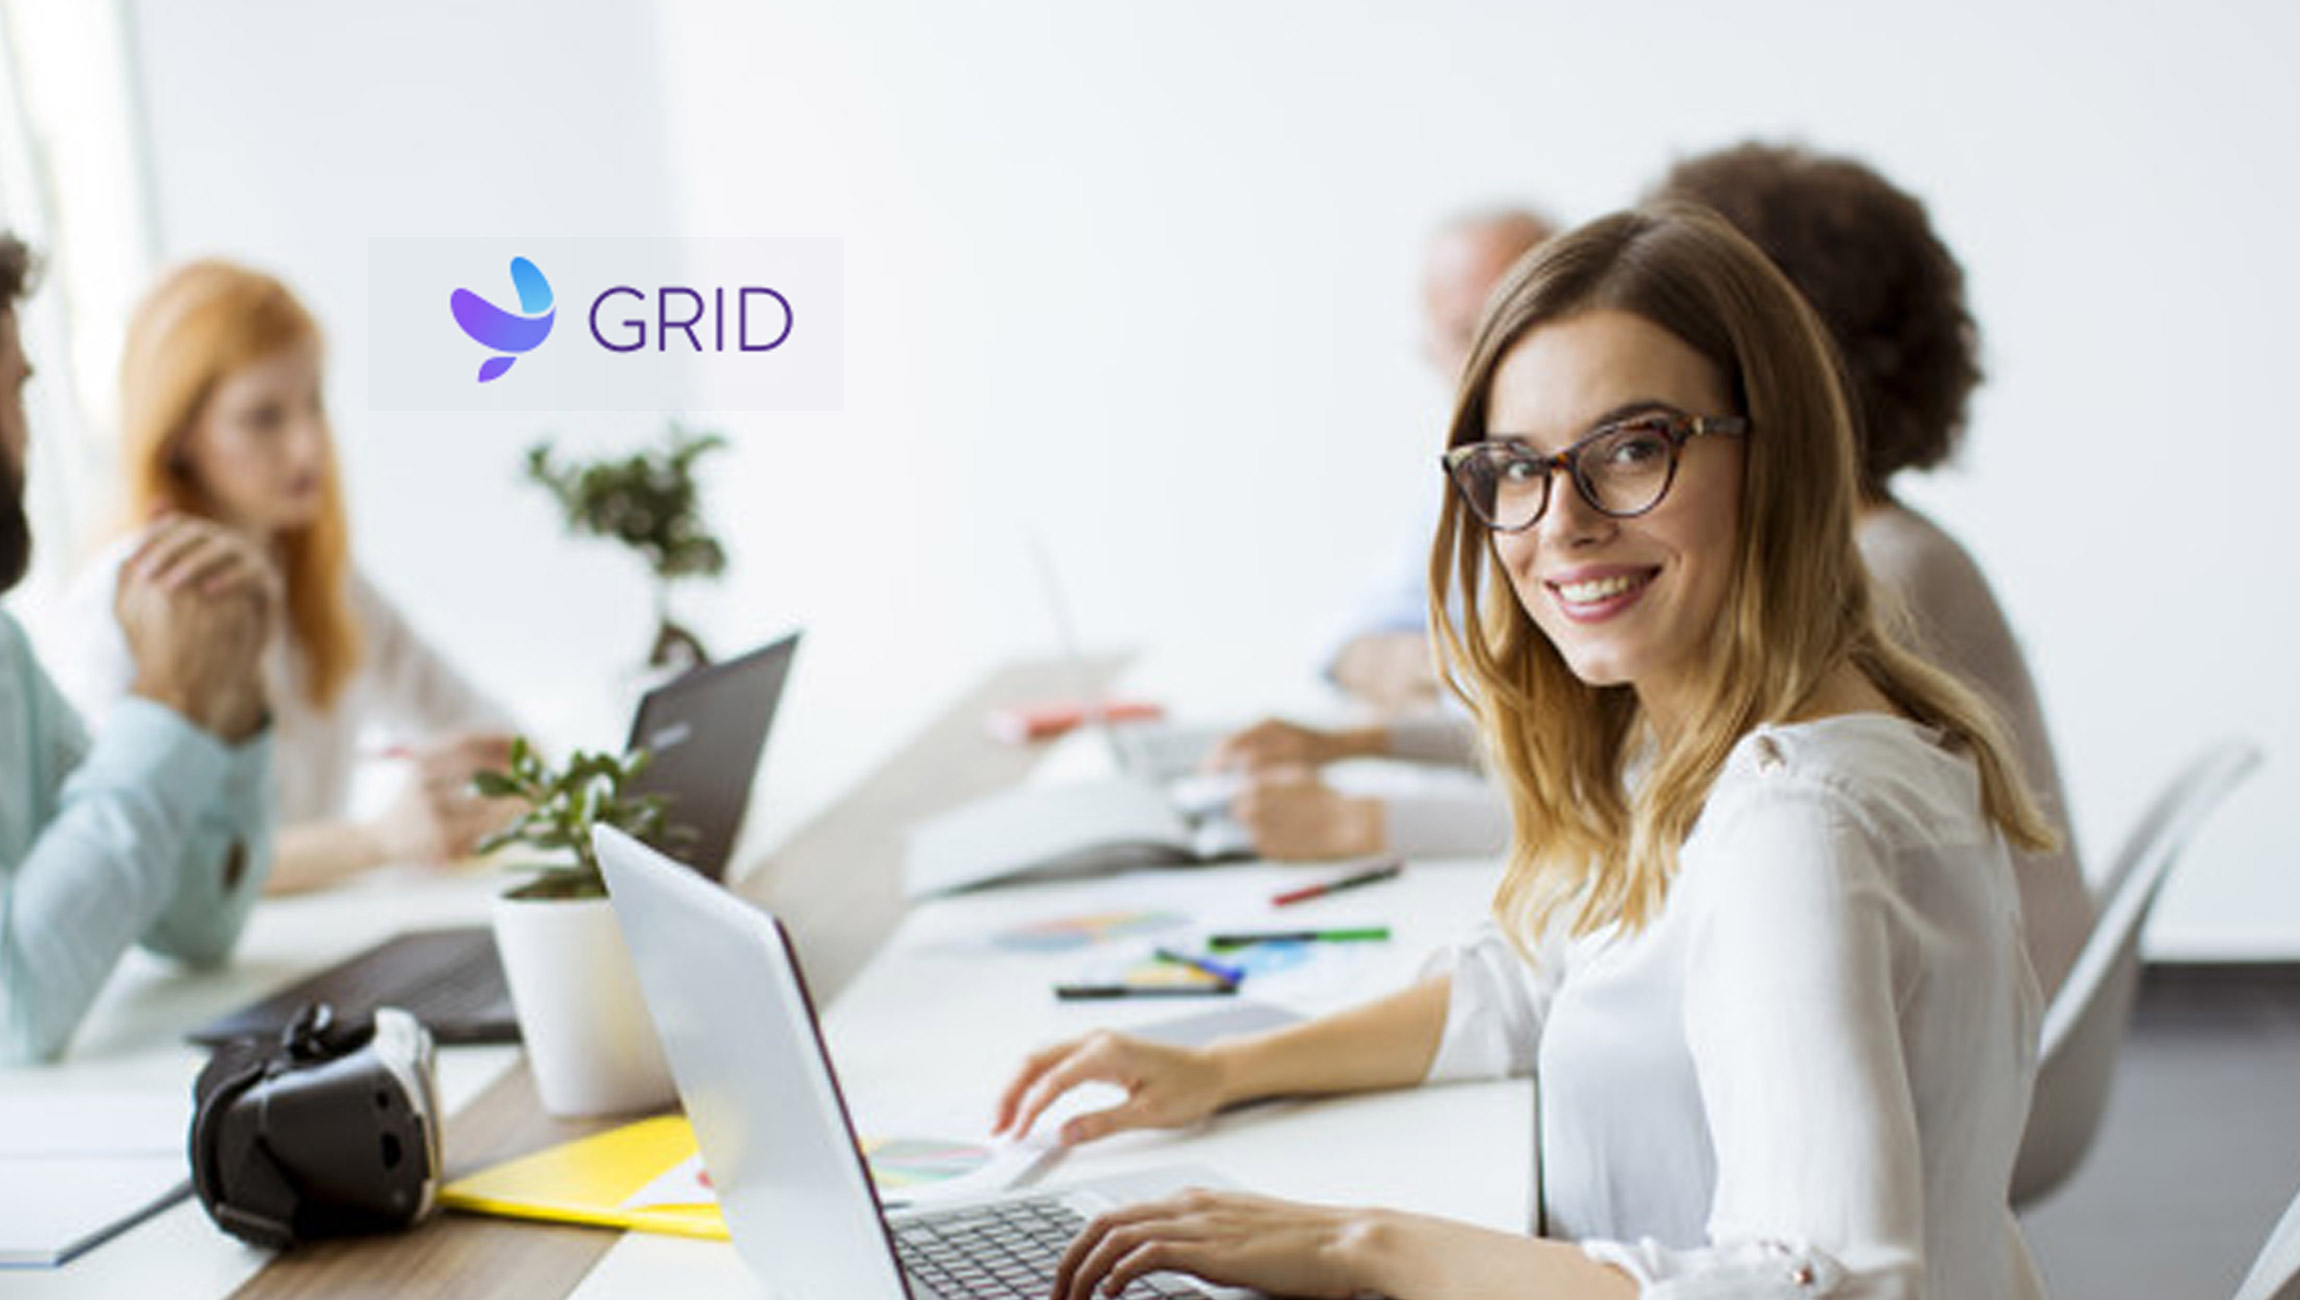 GRID Raises $12M in Series A Funding led by NEA to Revolutionize Data Work